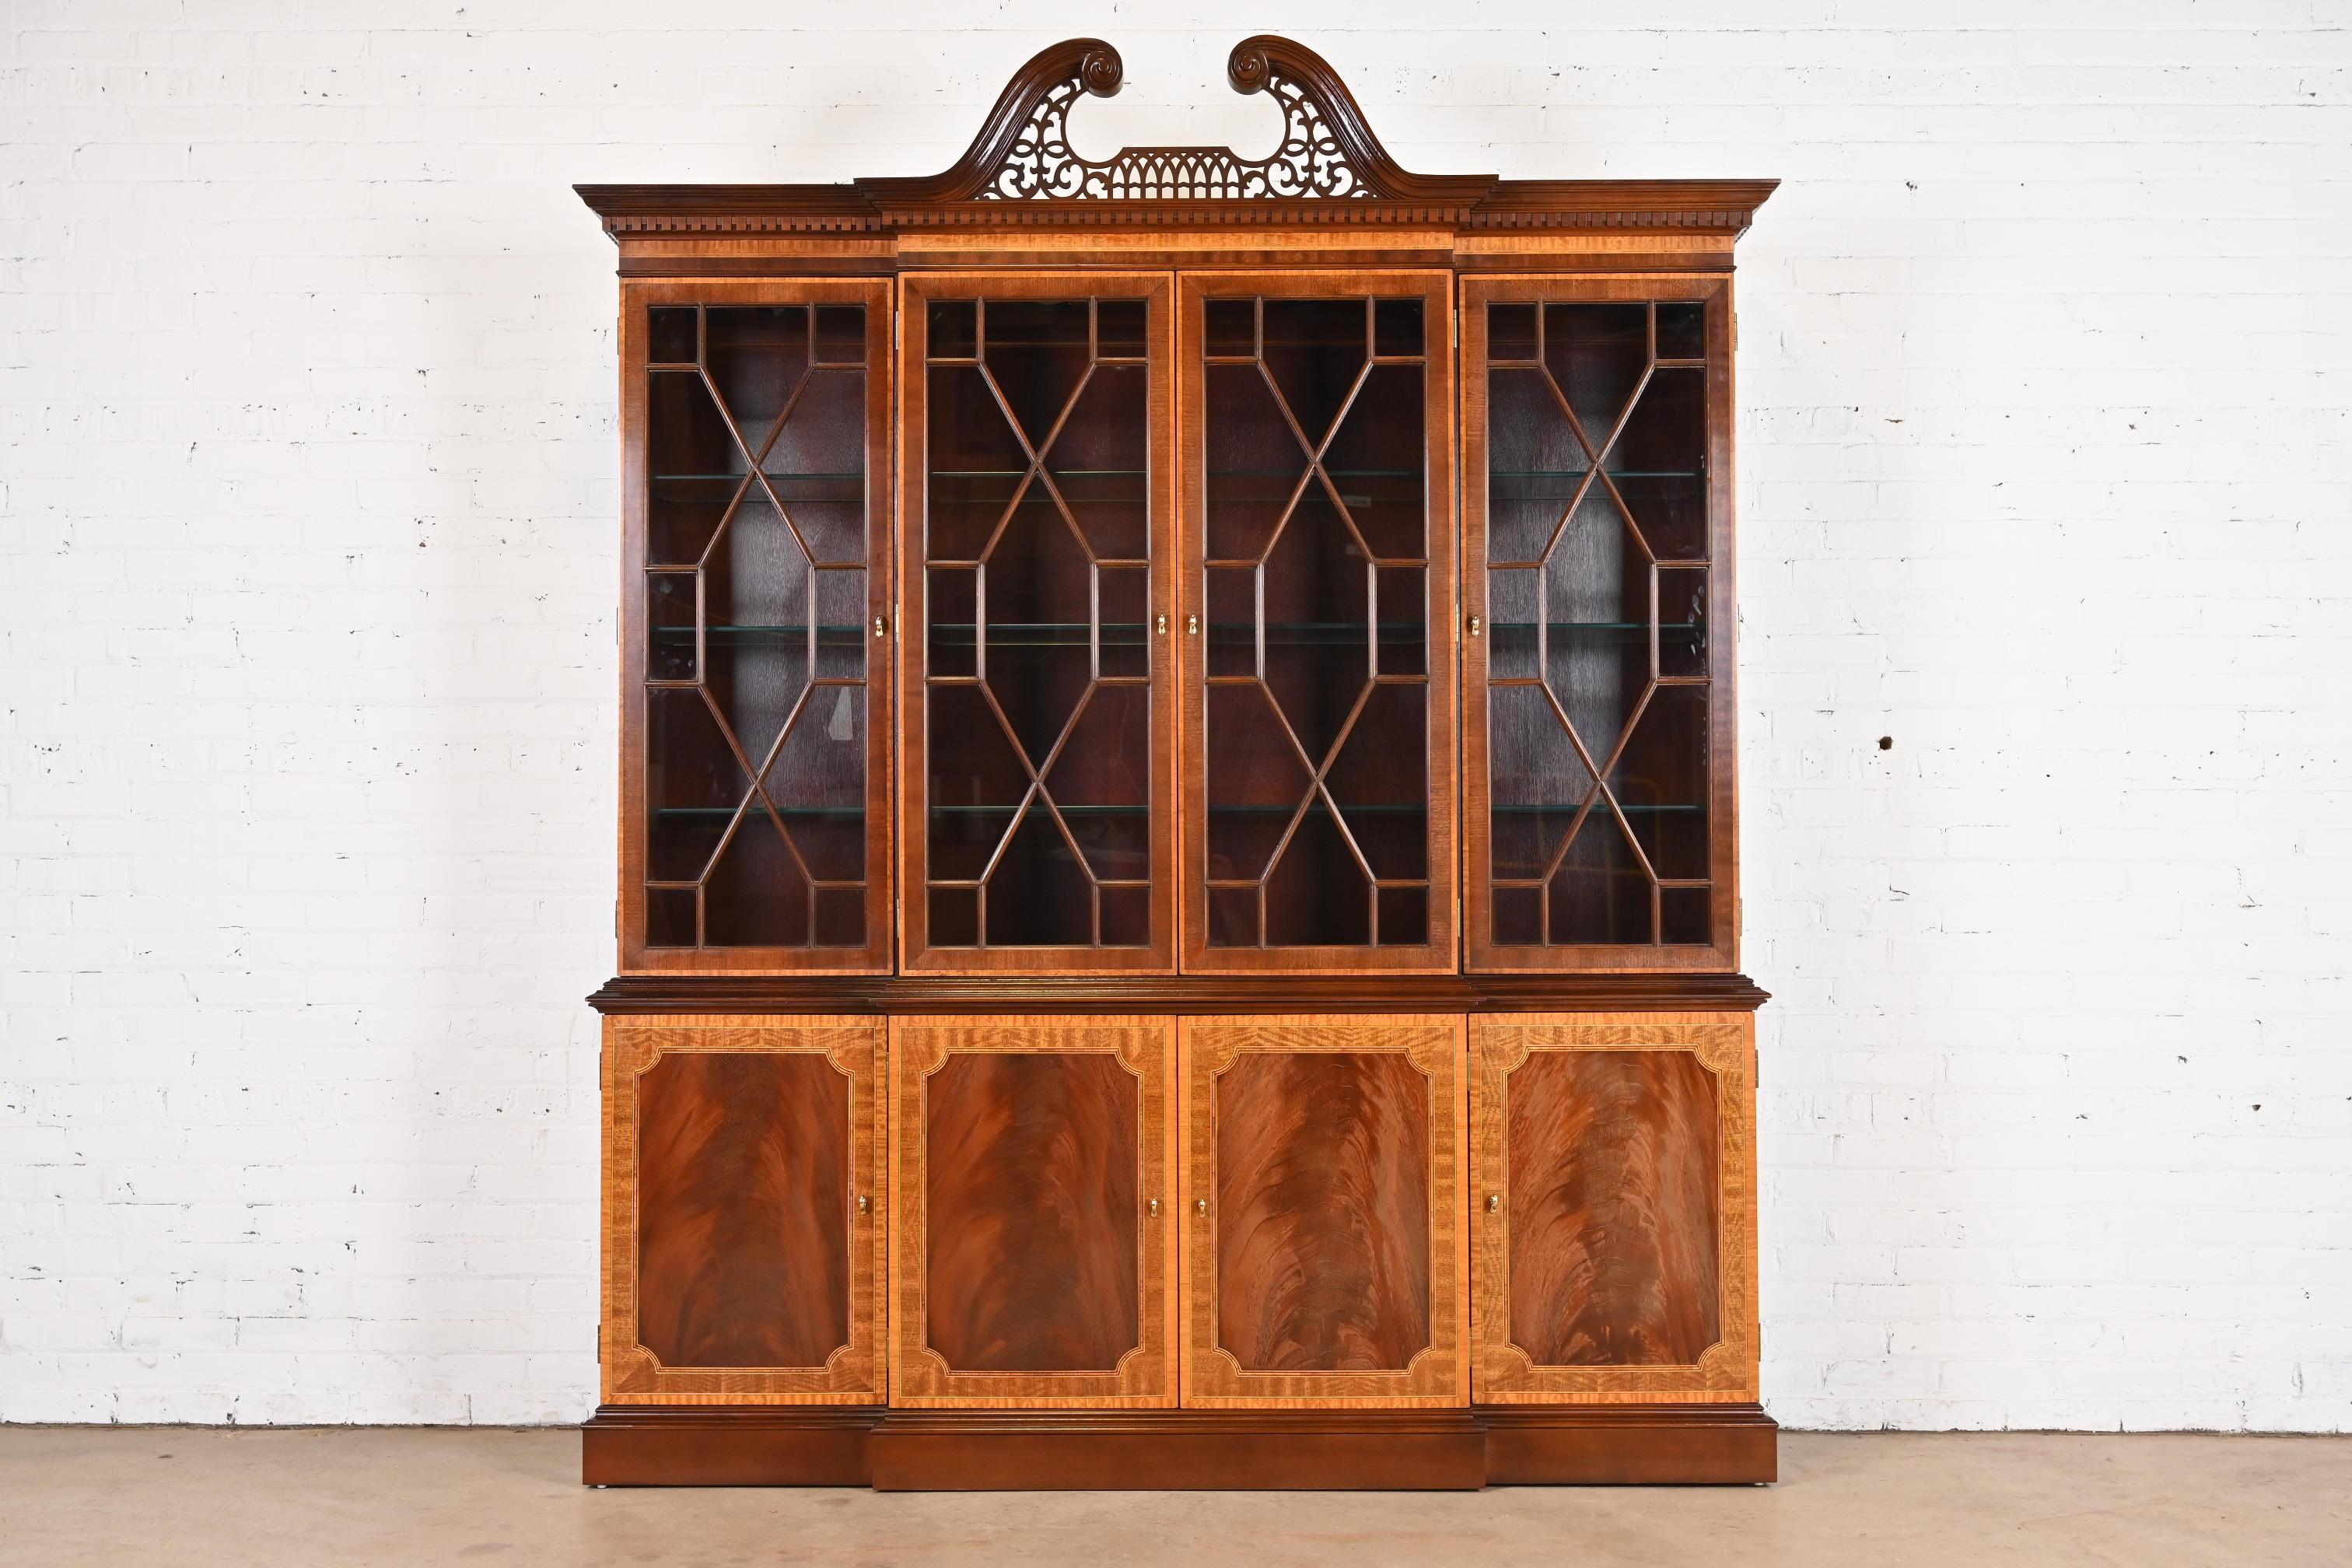 A gorgeous Georgian or Chippendale style lighted breakfront bookcase or dining cabinet

In the manner of Baker Furniture

By Craftique

USA, Circa 1980s

Carved mahogany with satinwood banding, mullioned glass front doors, and original brass